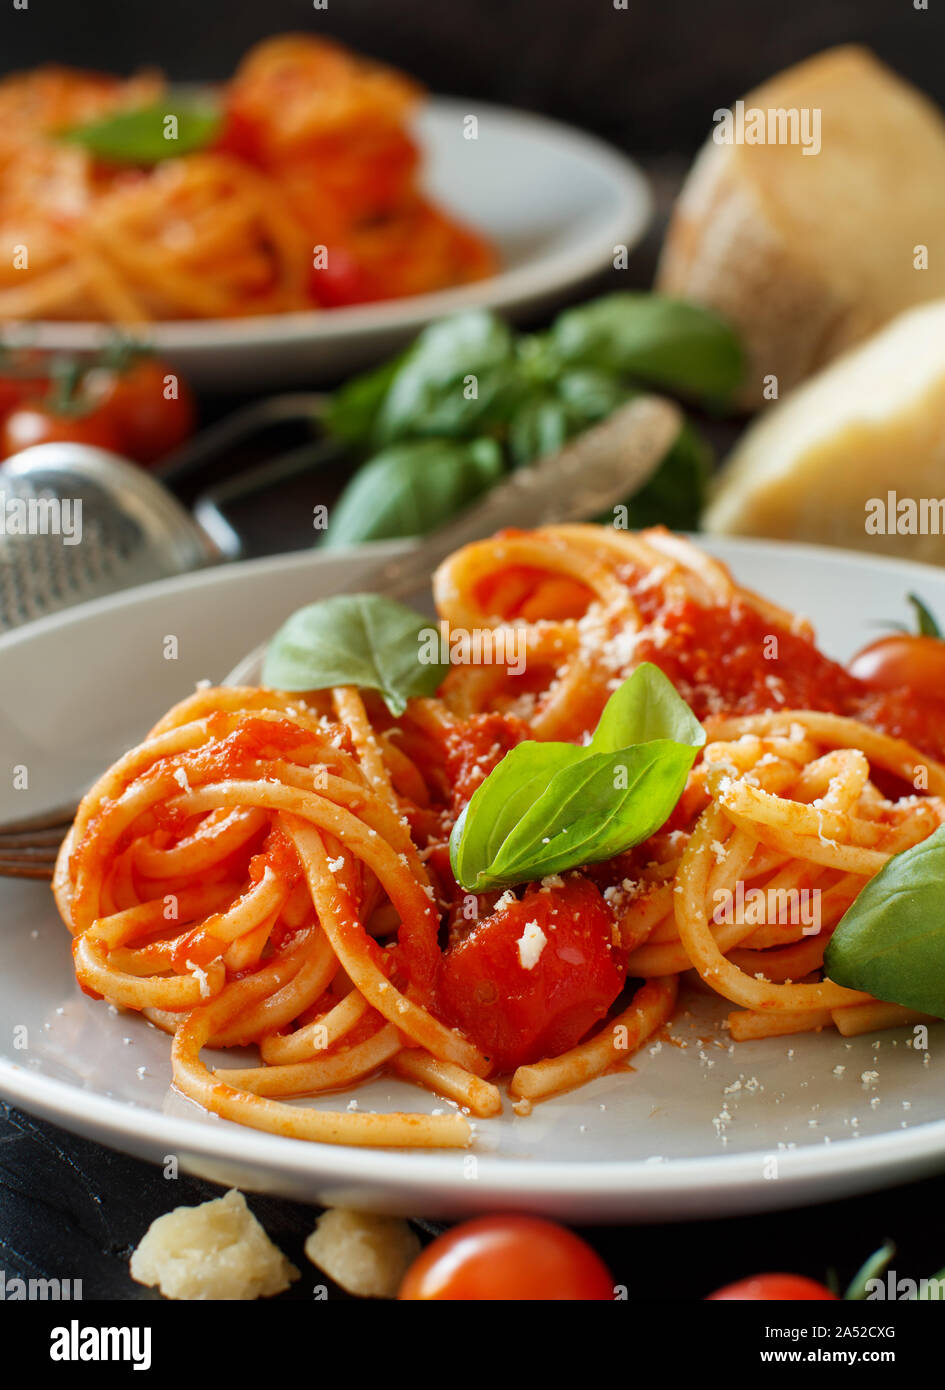 Spaghetti pasta with tomato sauce, basil and cheese on a wooden table Stock Photo